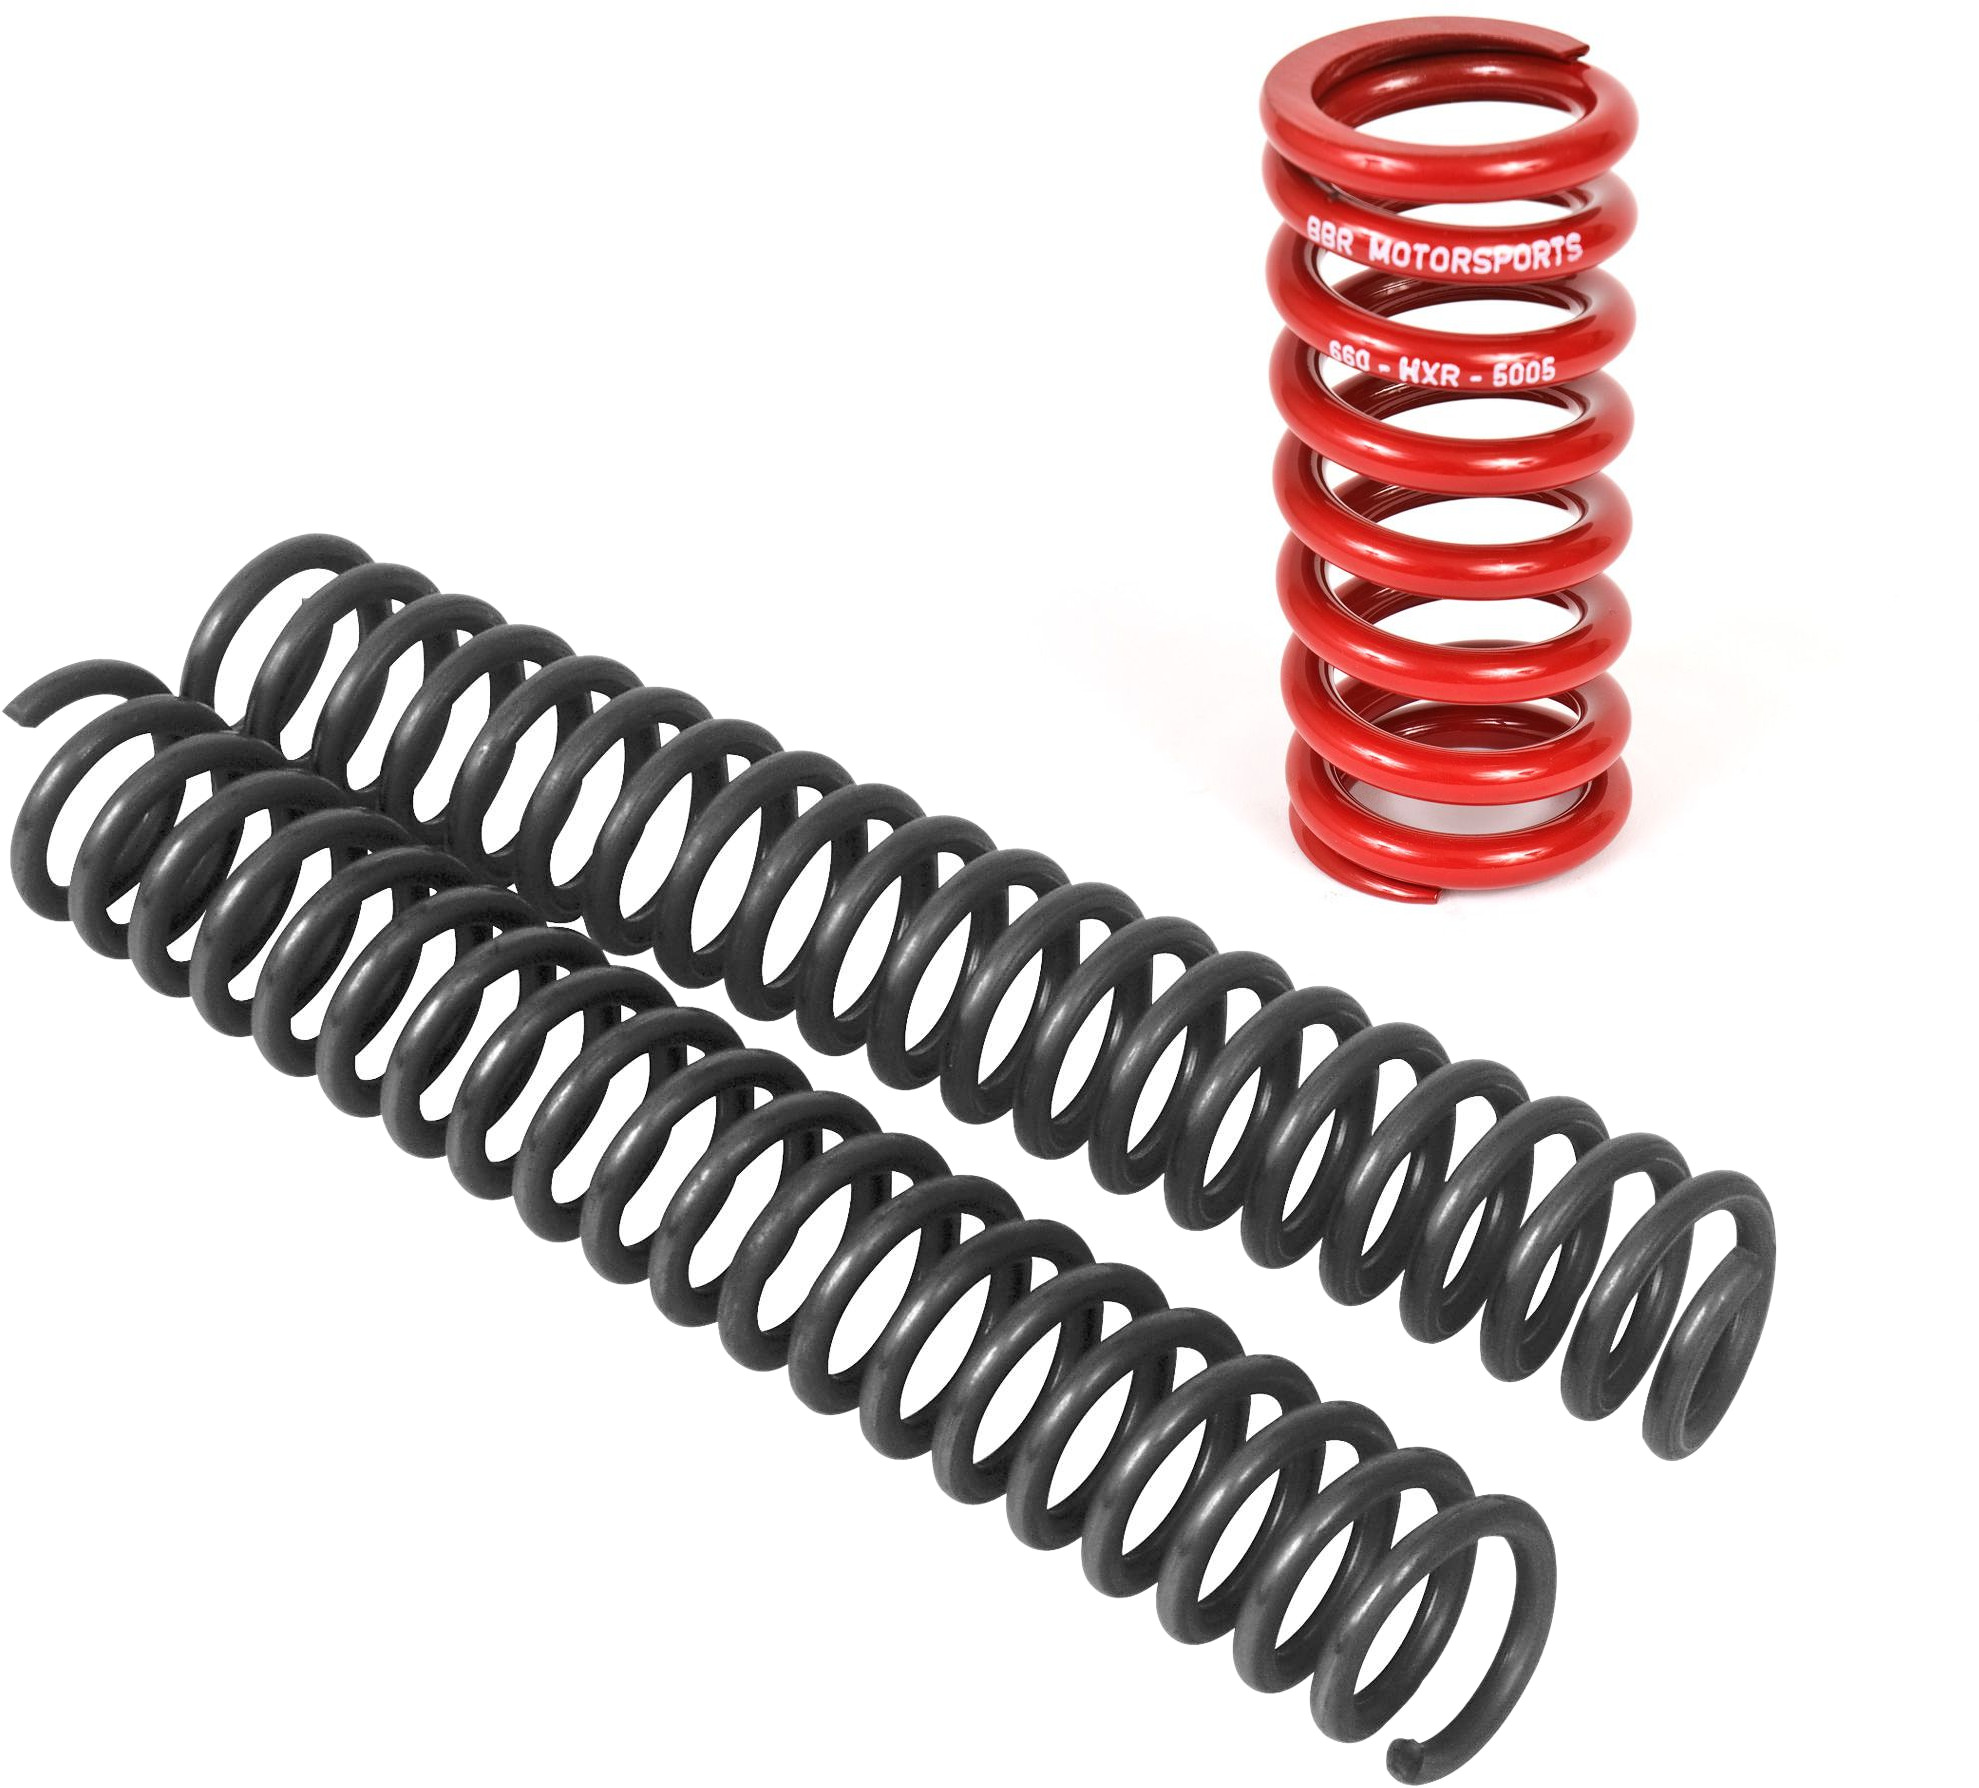 Heavy Duty Fork & Shock Spring Kit - For 00-21 Honda CRF50F/XR50 & Suzuki DRZ70 - Click Image to Close